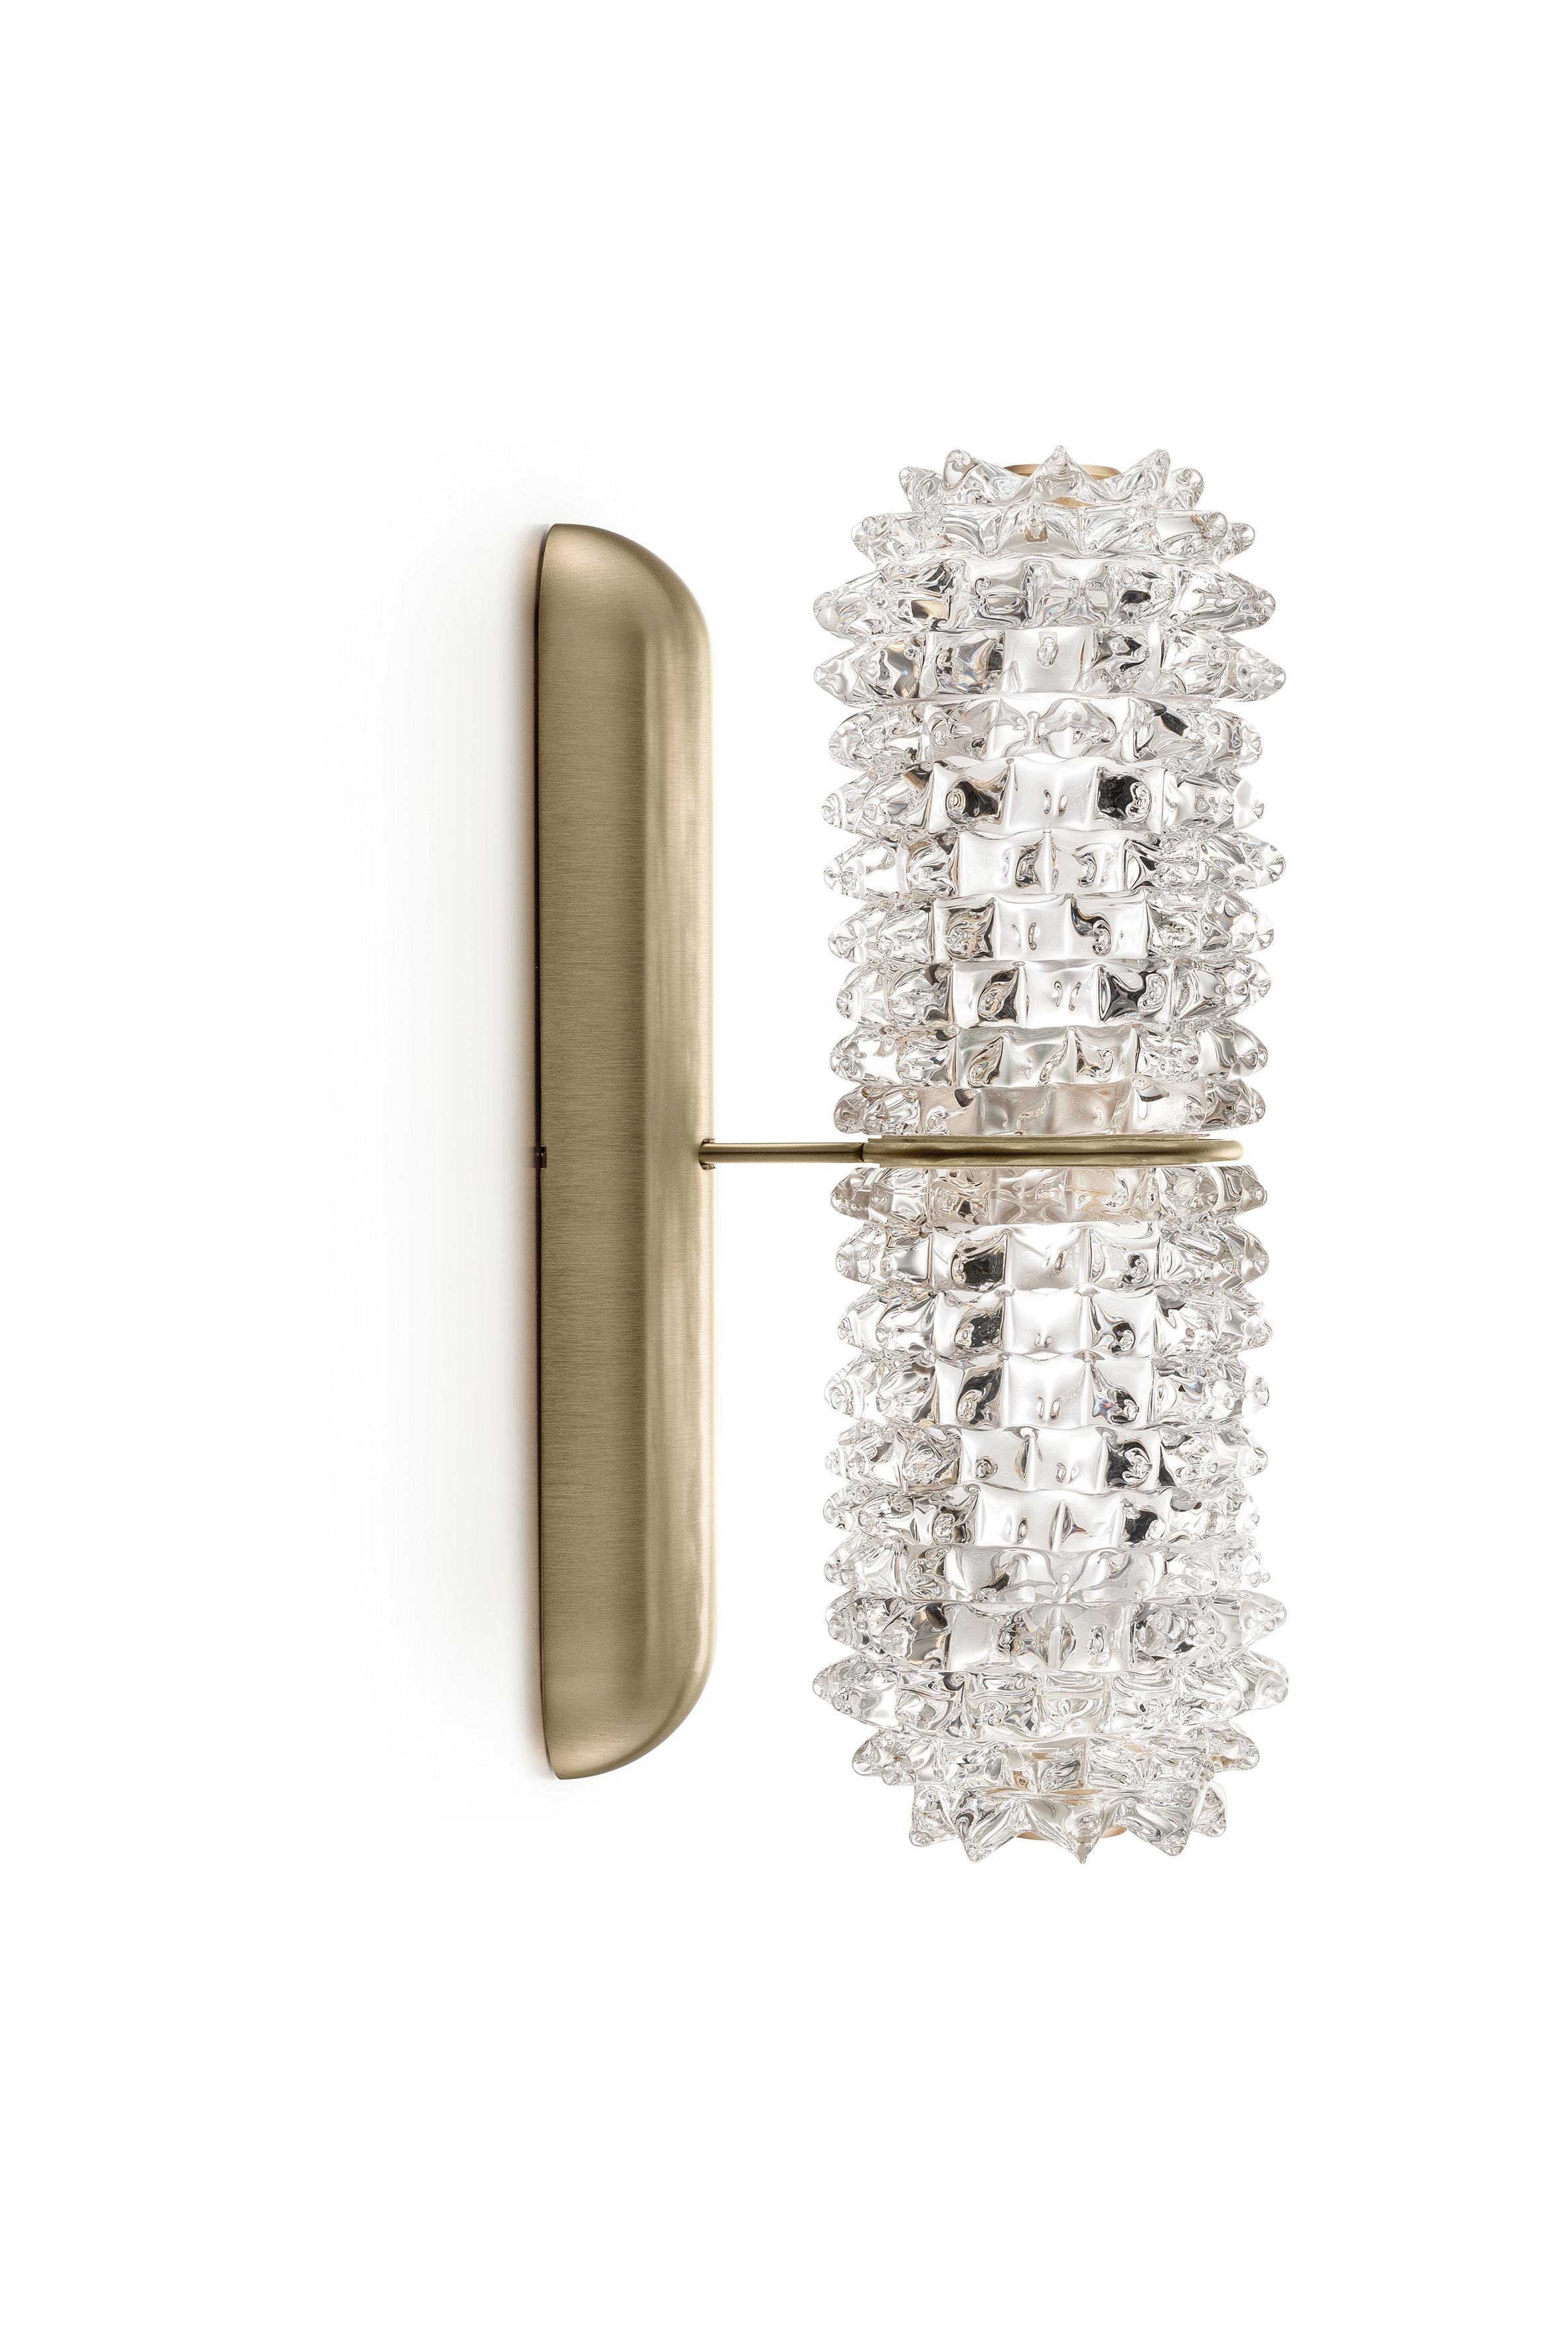 Barovier & Toso Opera 7389 Wall Sconce in Crystal with Black Nickel Finish 5